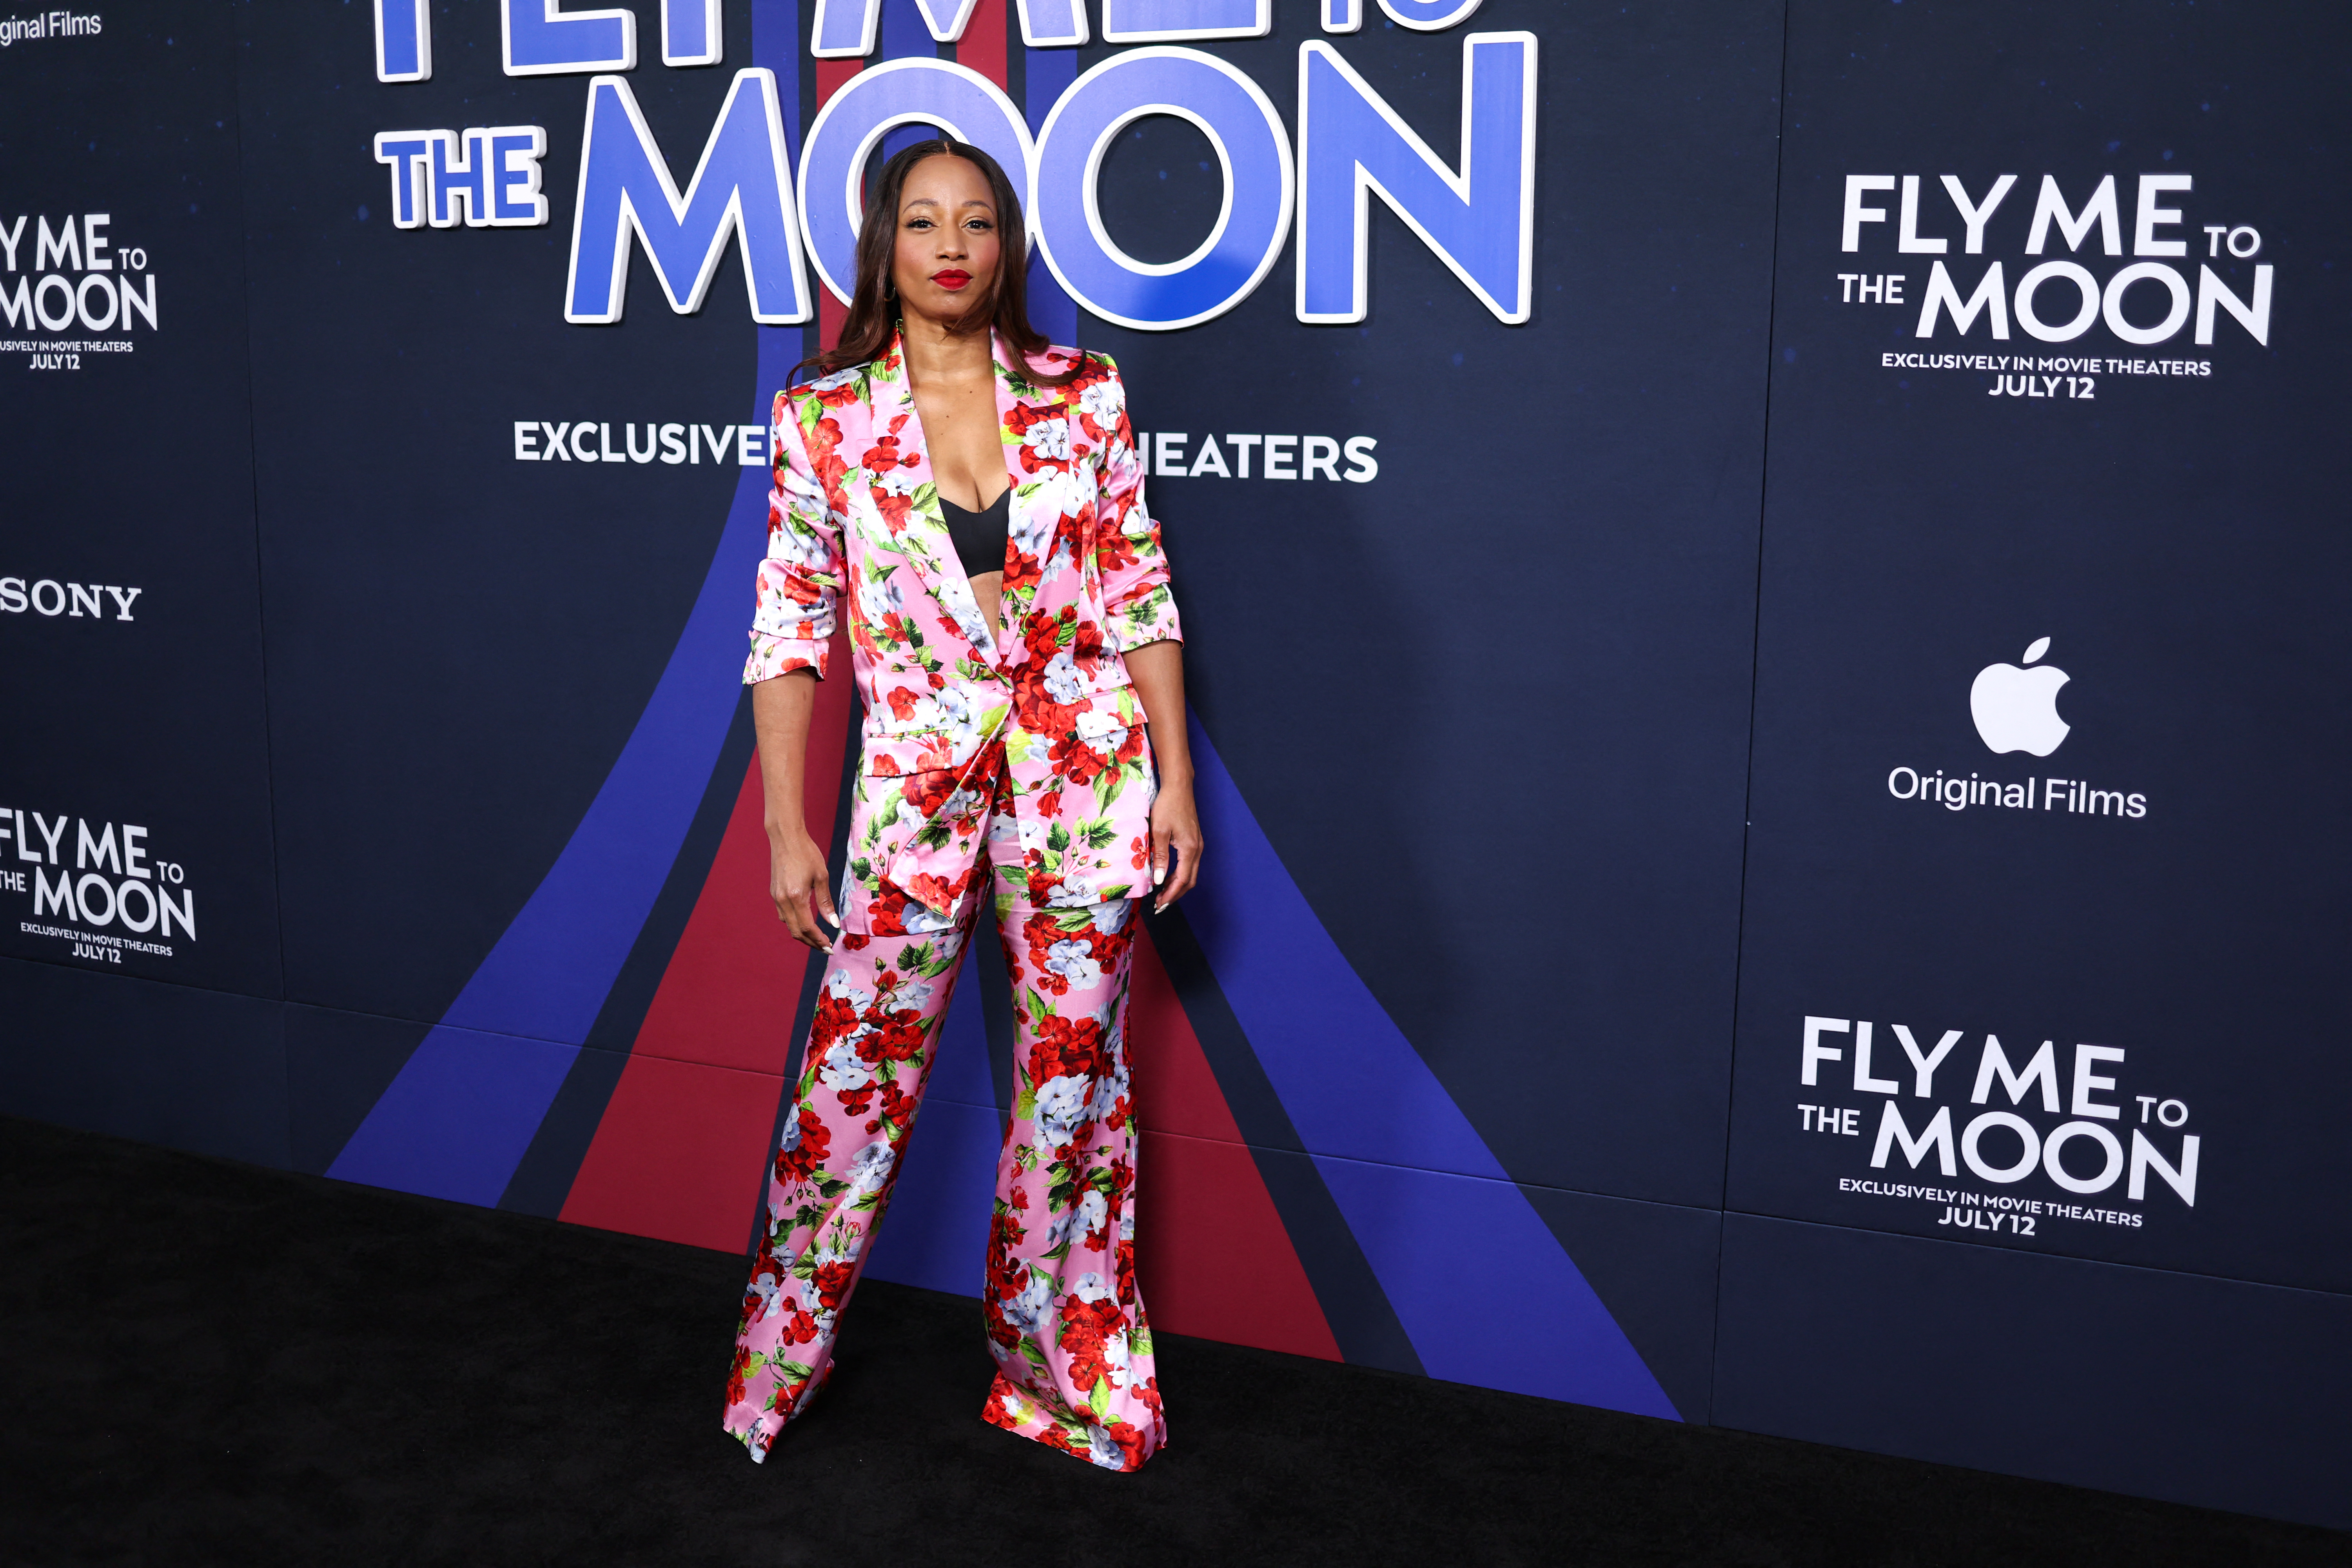 US actress Monique Coleman attends the world premiere of Apple Original Films' "Fly Me to the Moon" at AMC Lincoln Square in New York on July 8, 2024. (Photo by Charly TRIBALLEAU / AFP) (Photo by CHARLY TRIBALLEAU/AFP via Getty Images)